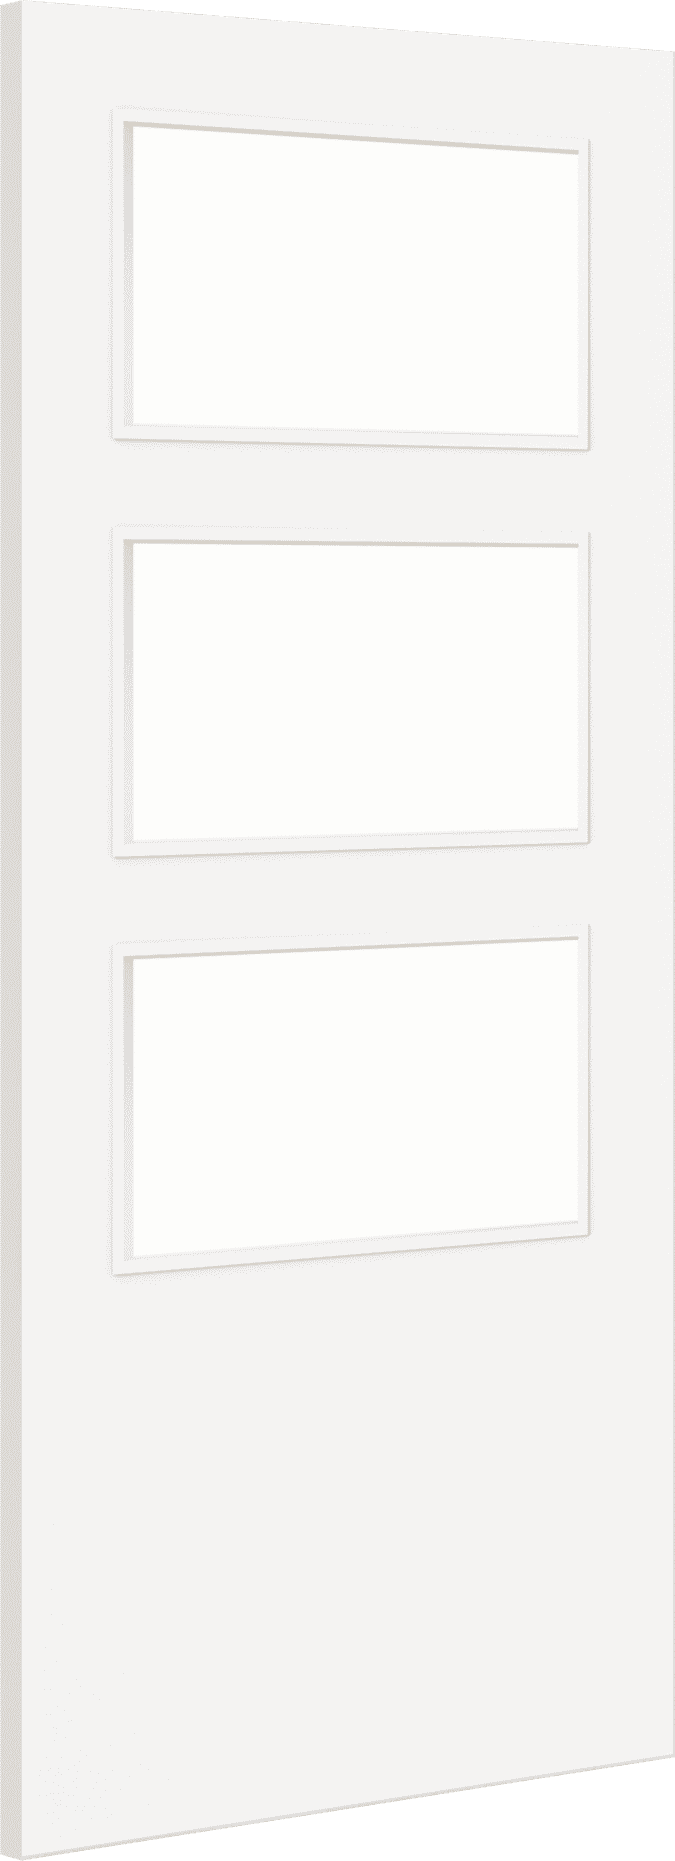 2040mm x 826mm x 44mm Architectural Paint Grade White 03 Frosted Glazed Fire Door Blank